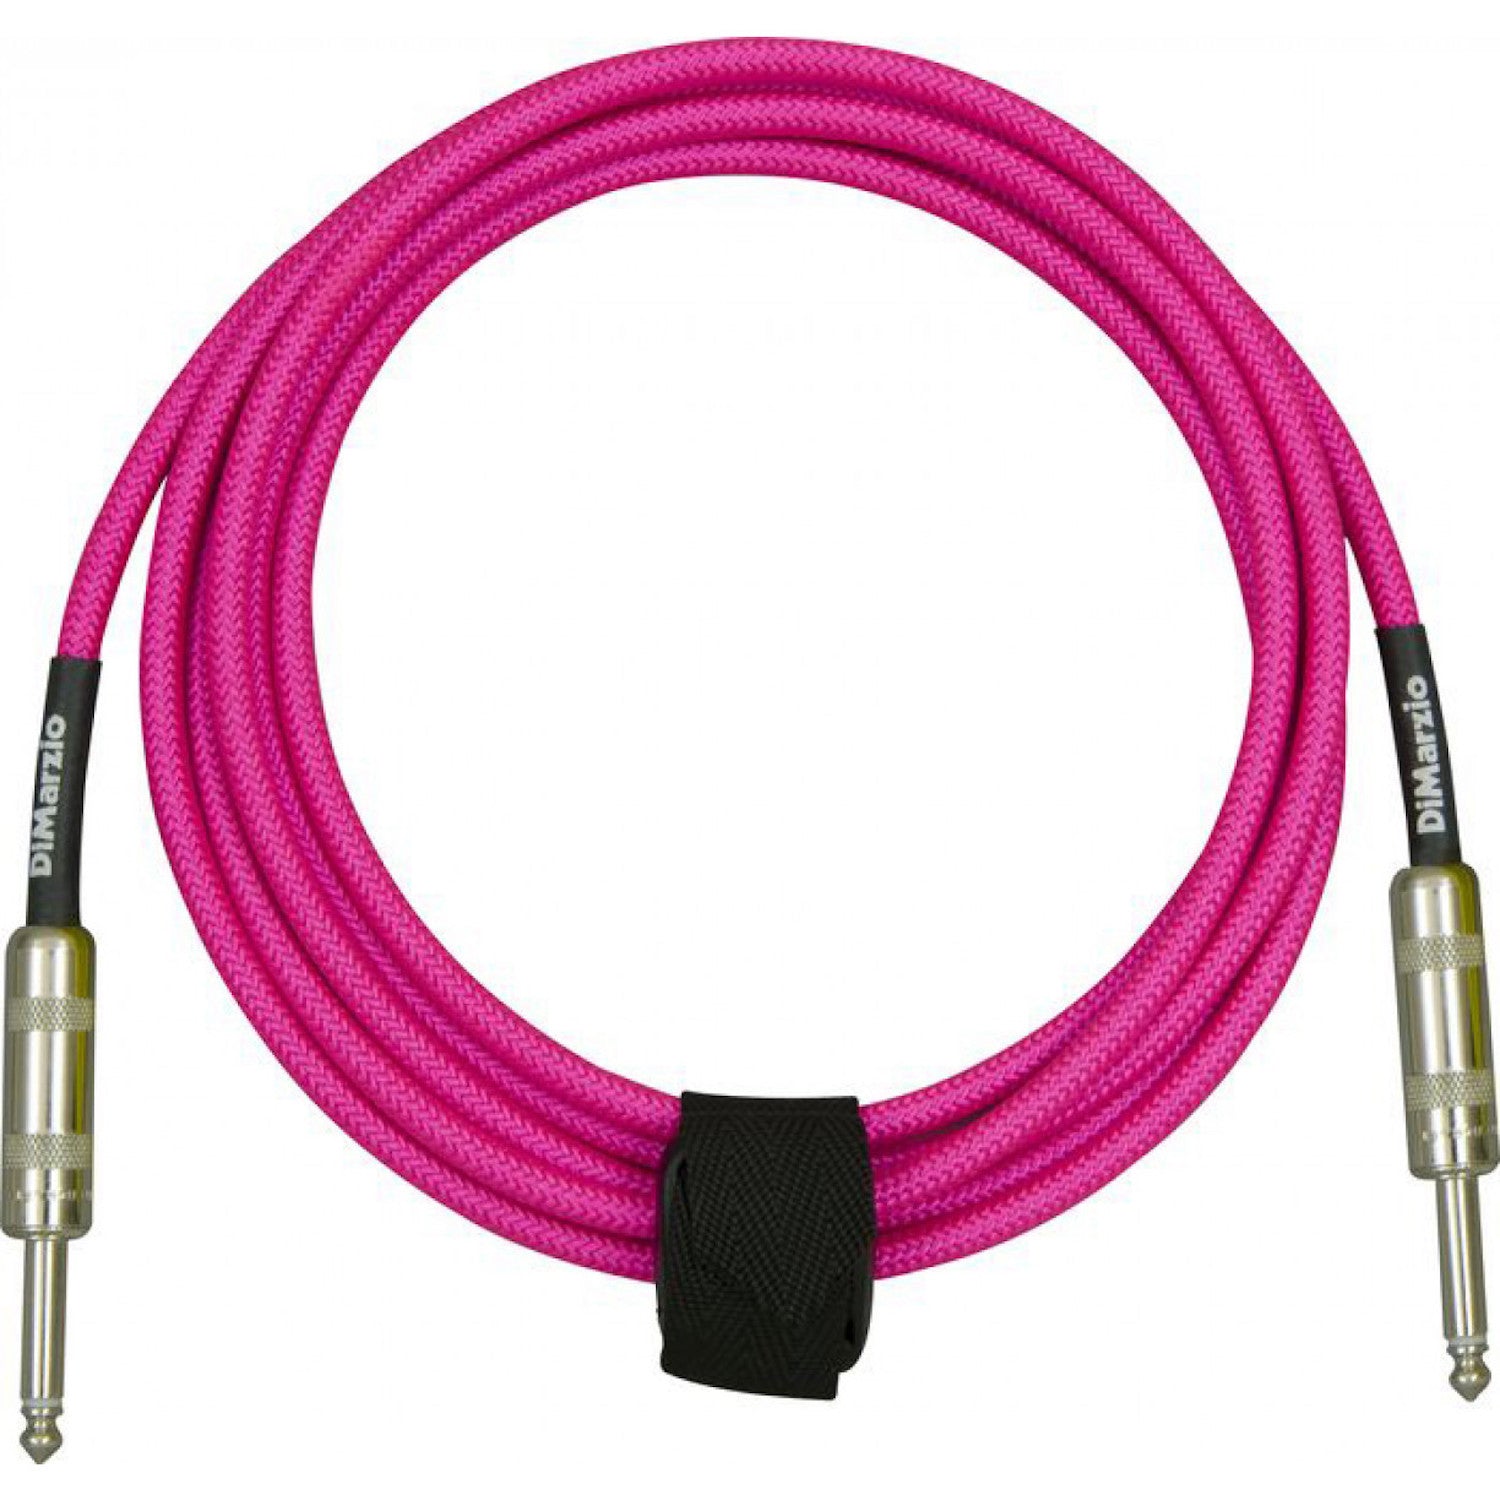 Dimarzio EP1710NP Over Braided Cable 10' Neon Pink